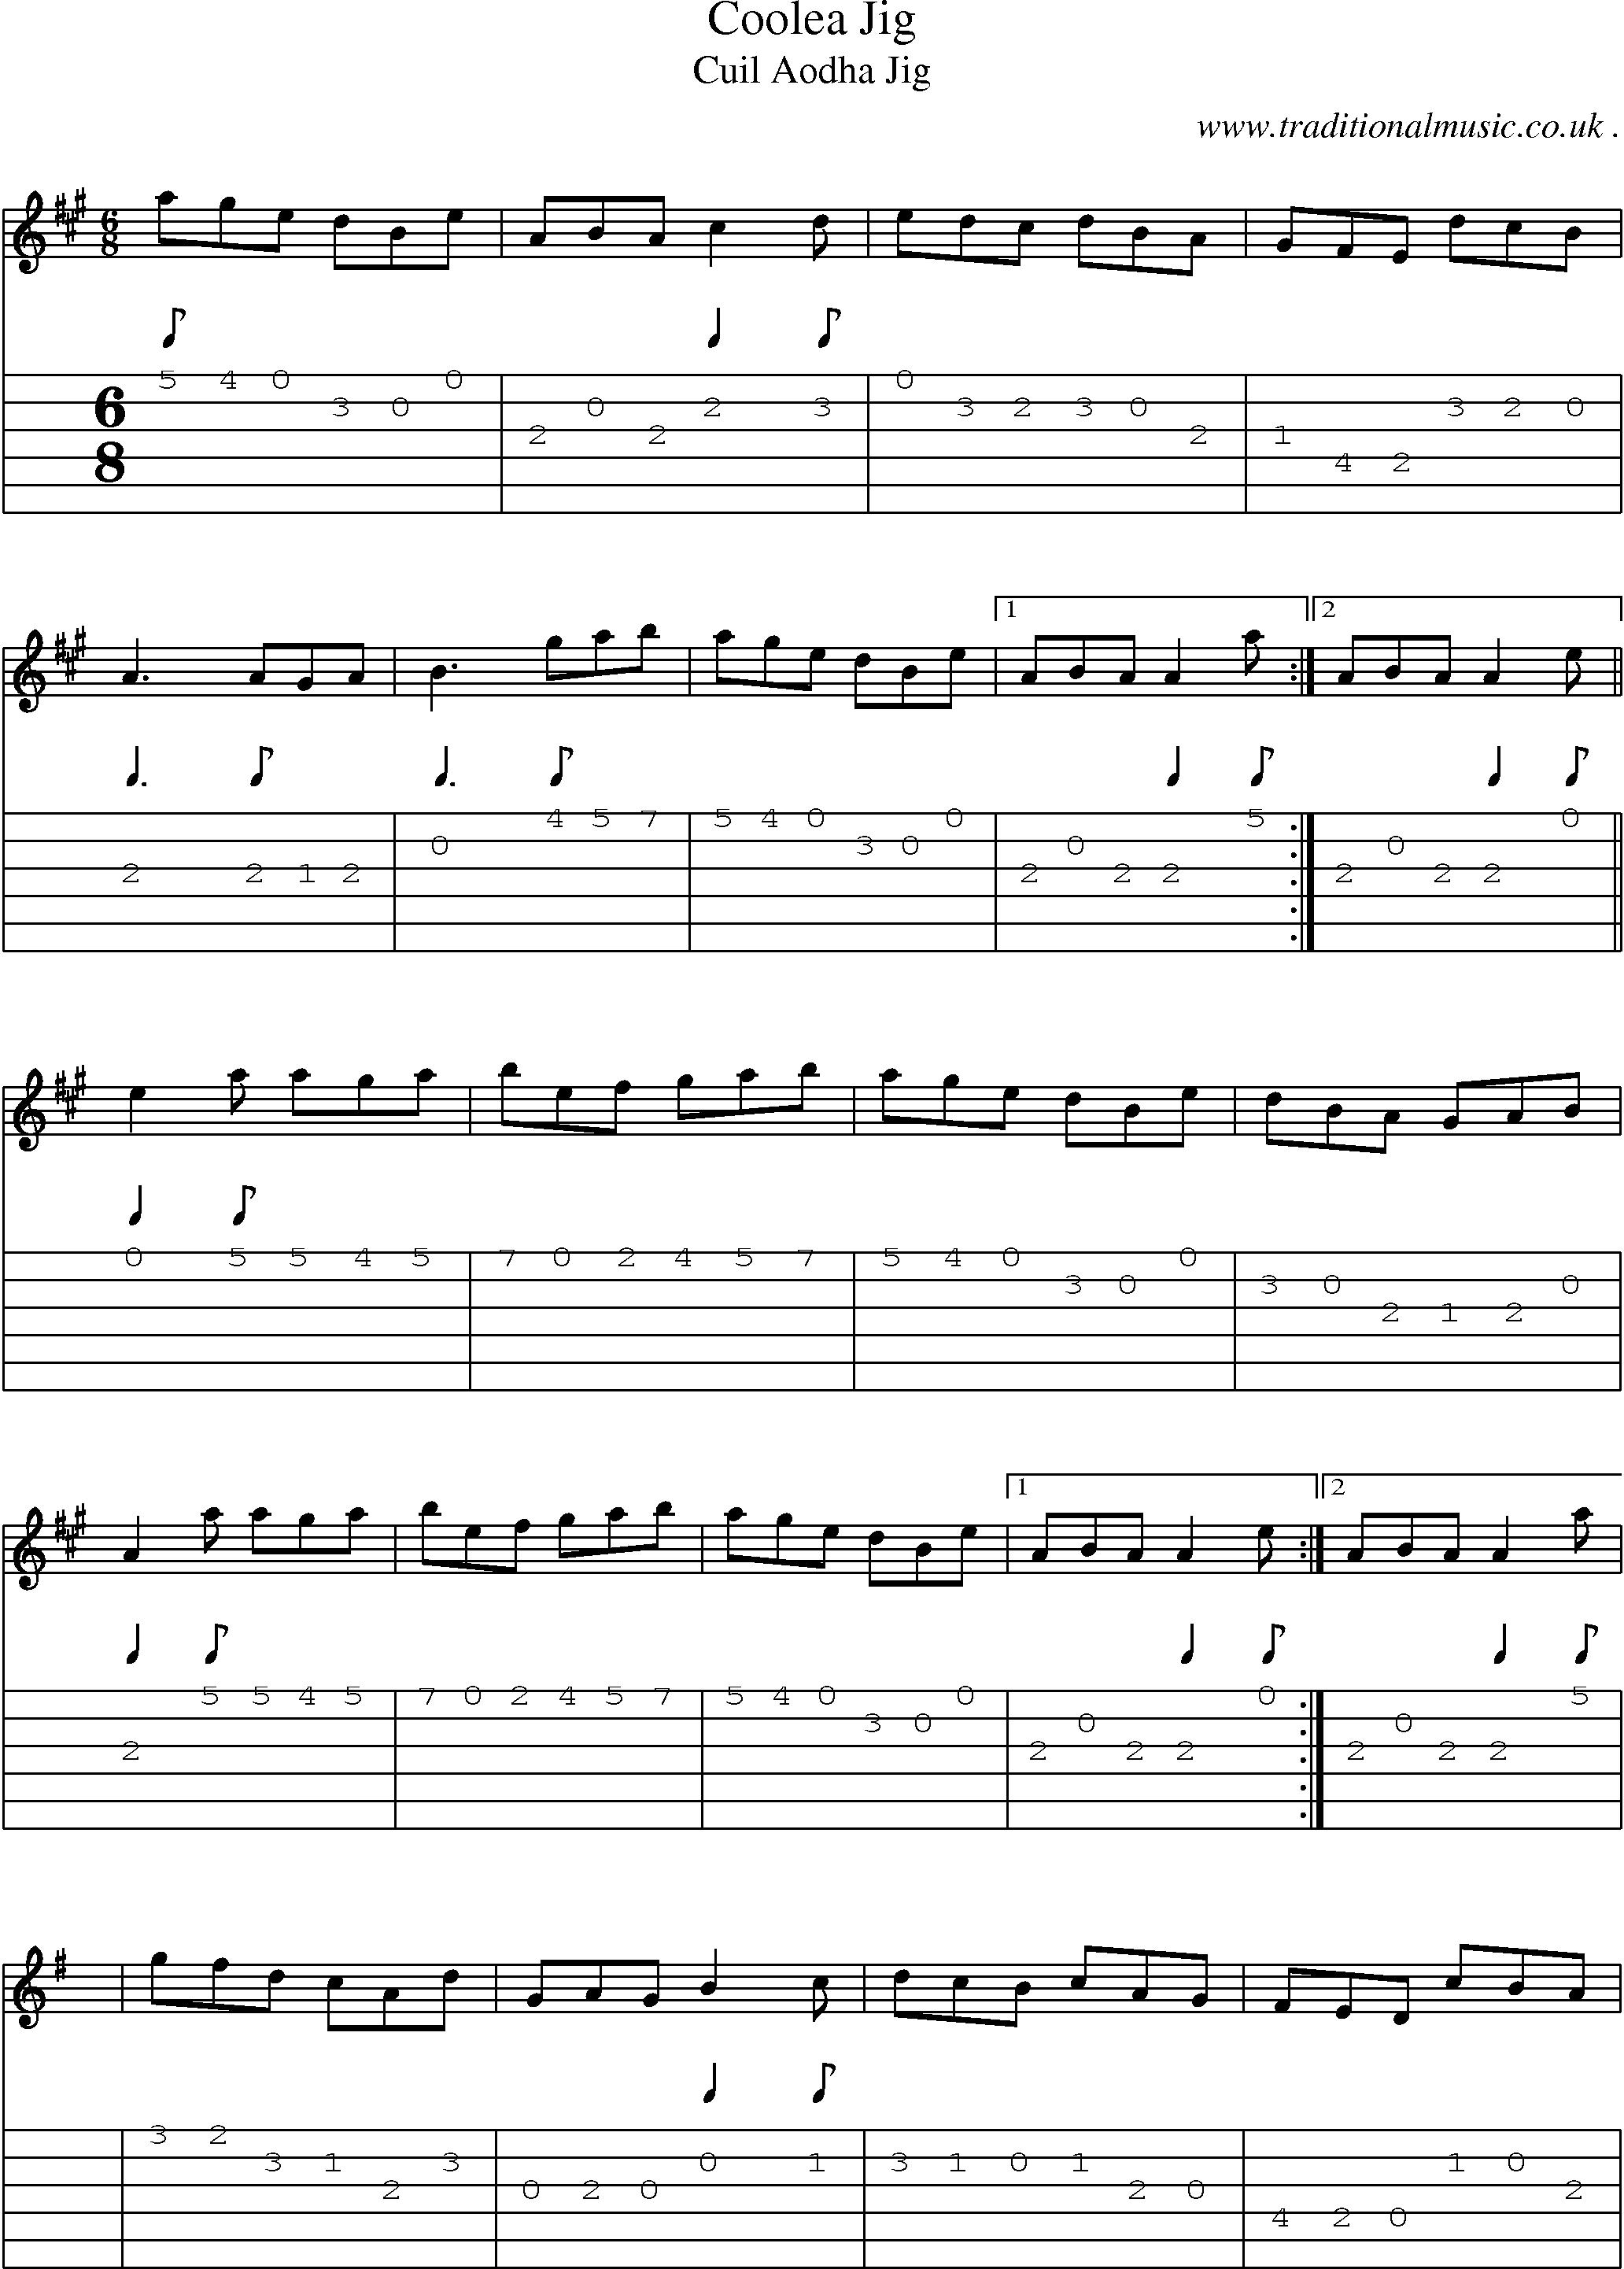 Sheet-Music and Guitar Tabs for Coolea Jig